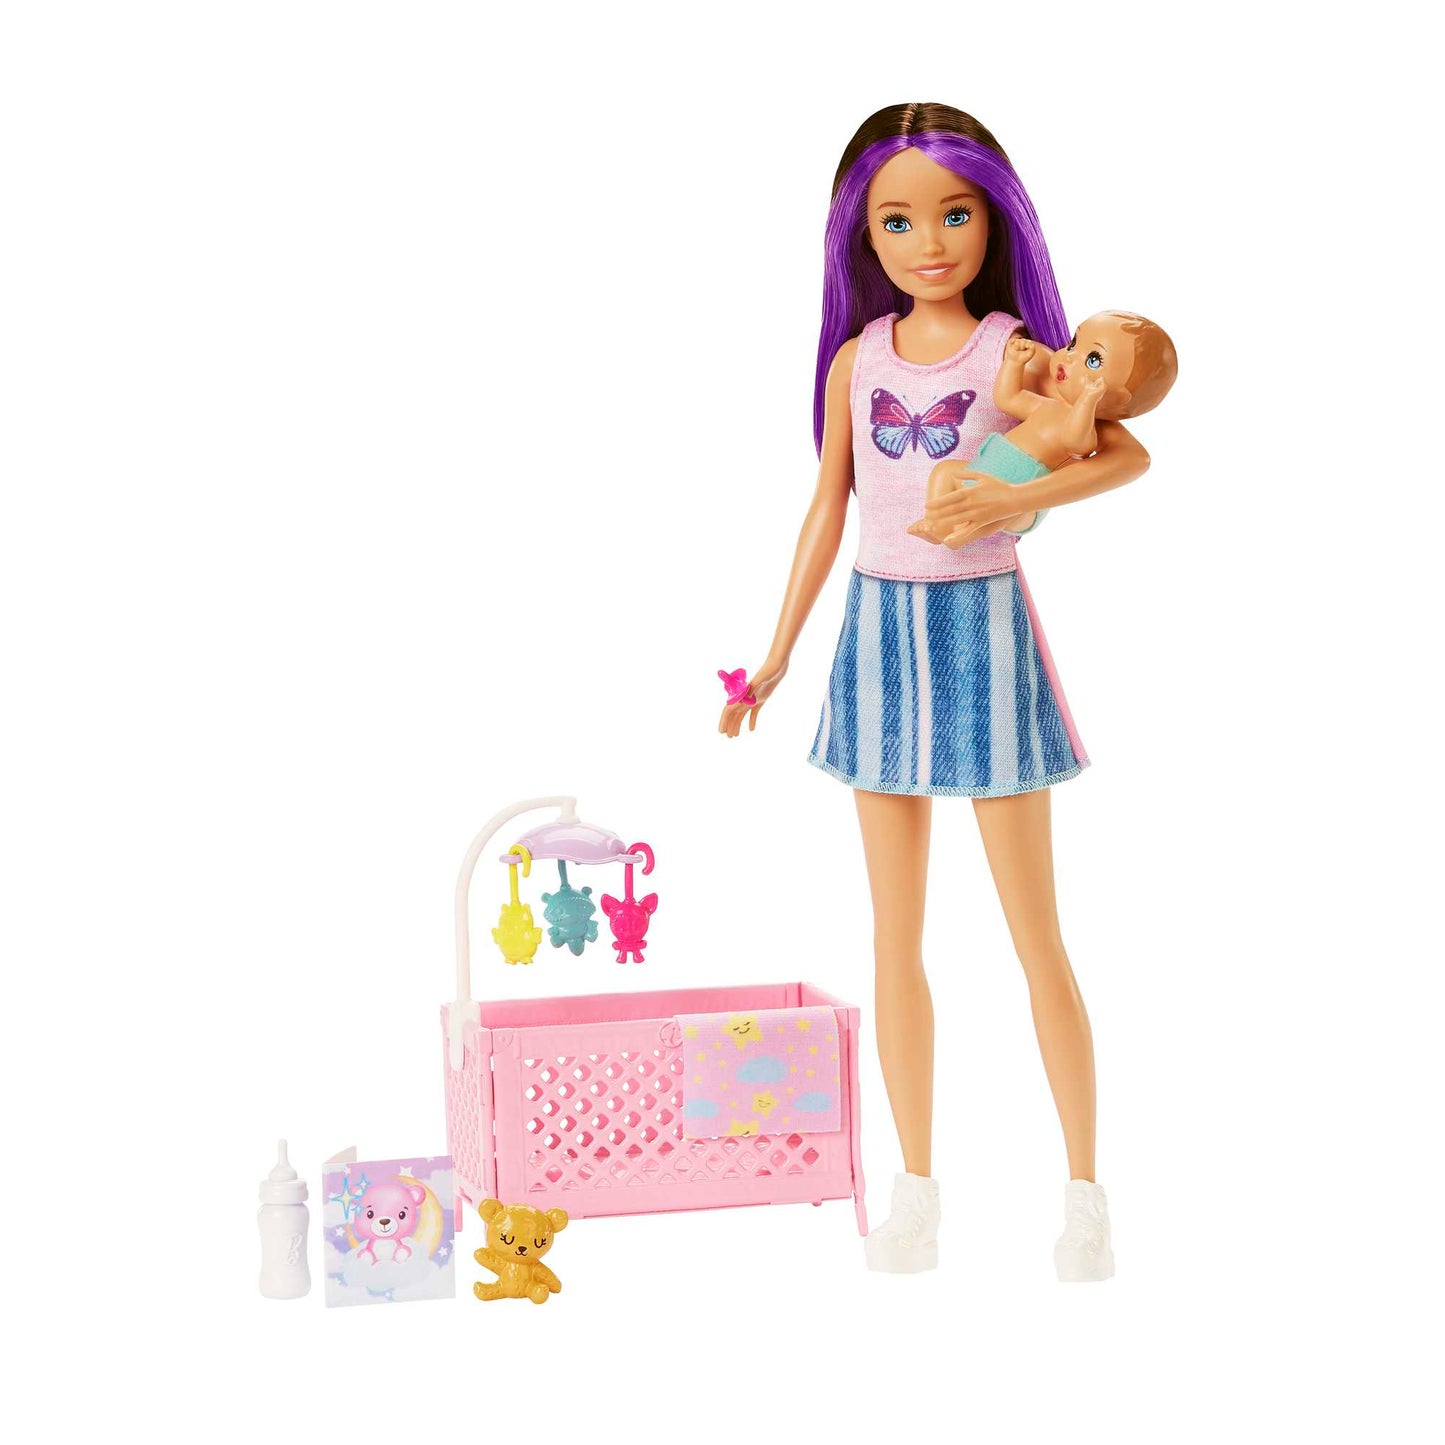 Barbie Skipper Babysitters Inc Dolls and Playset - Assorted*